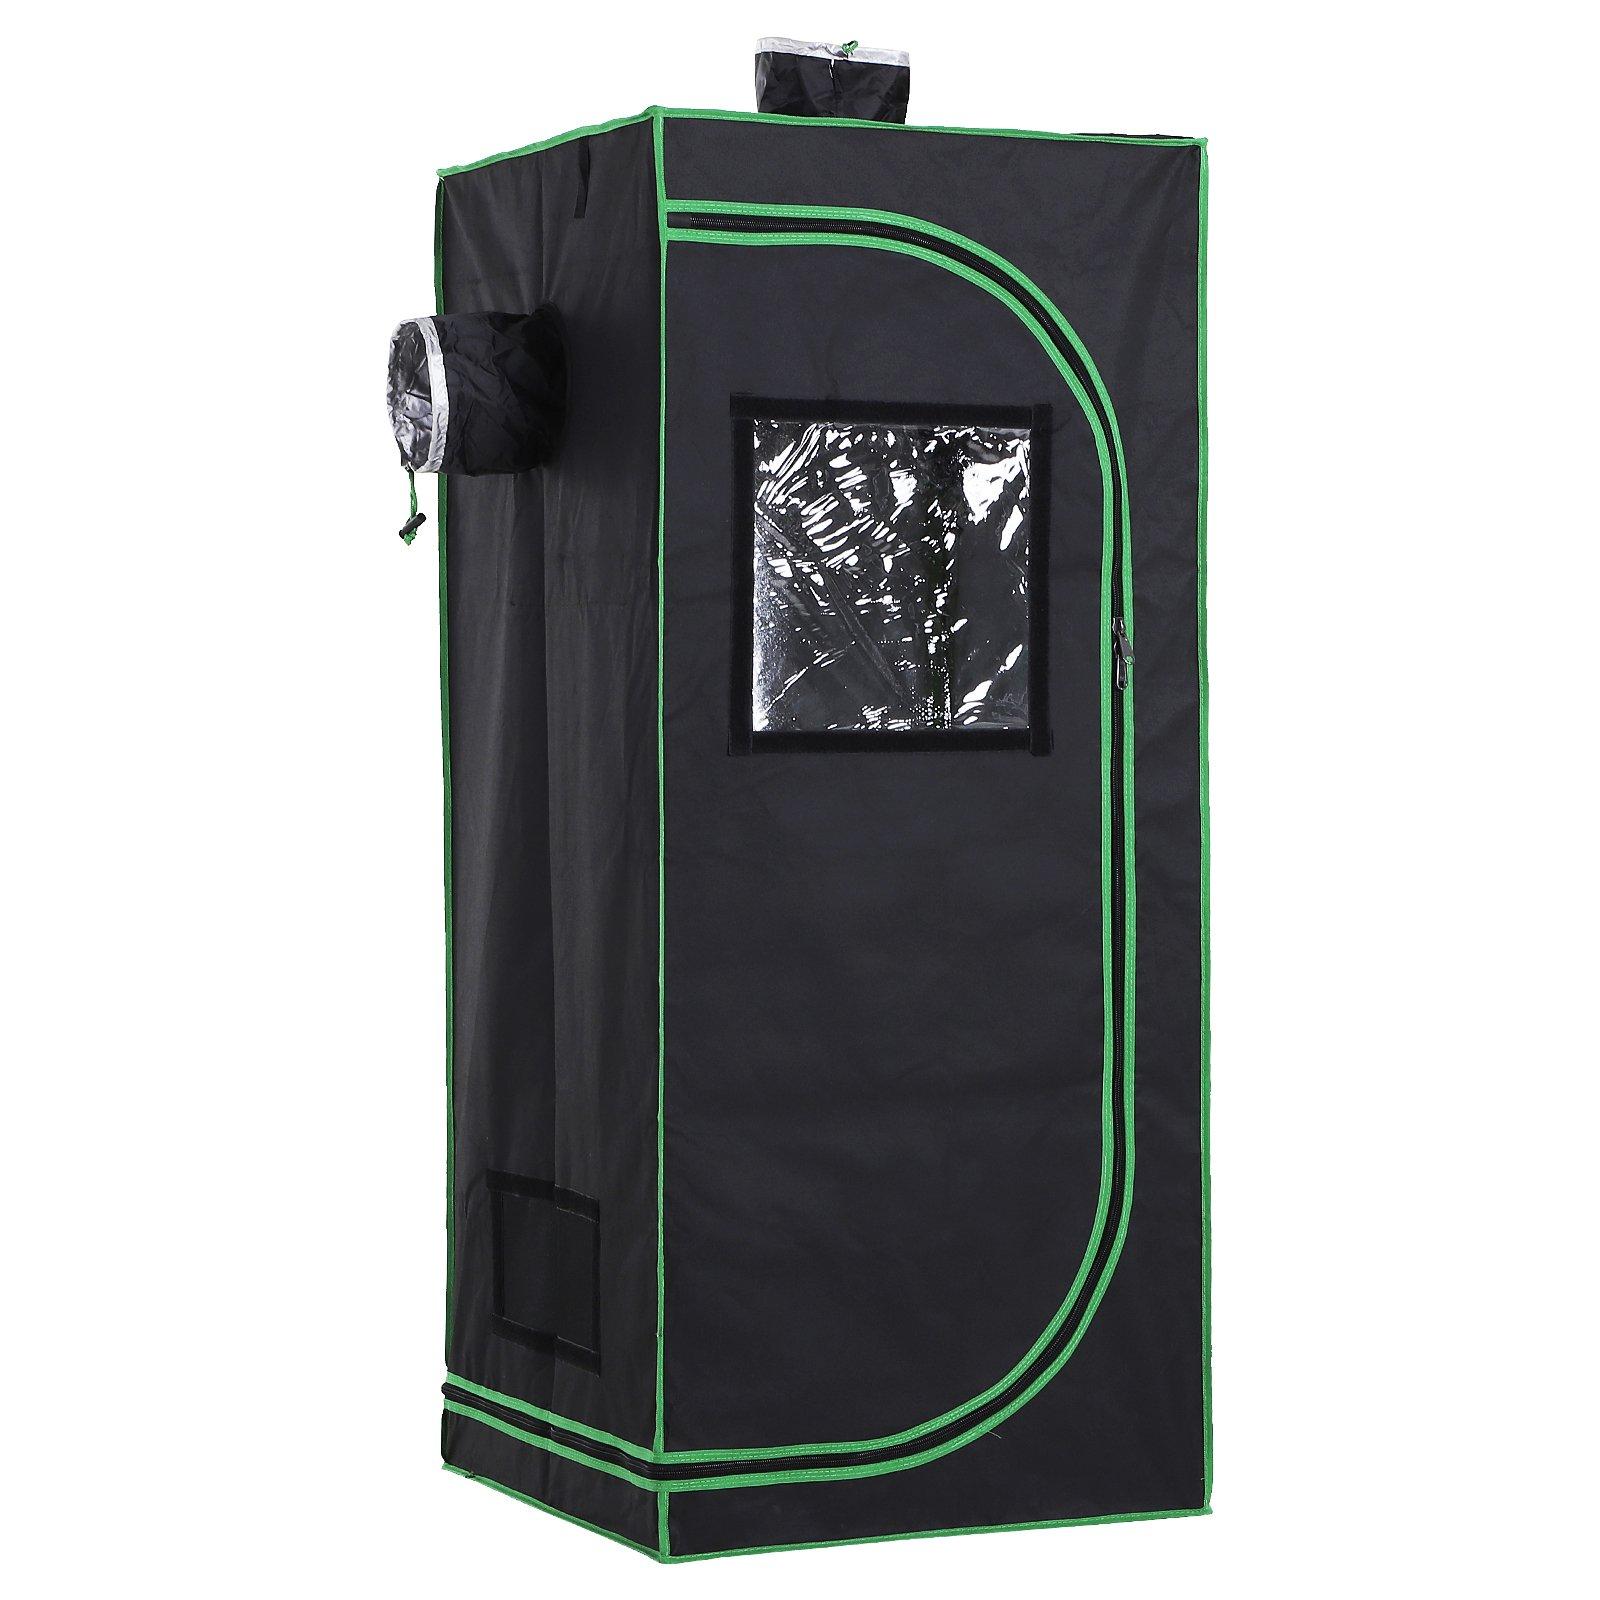 Mylar Hydroponic Grow Tent with Floor Tray for Indoor Plant